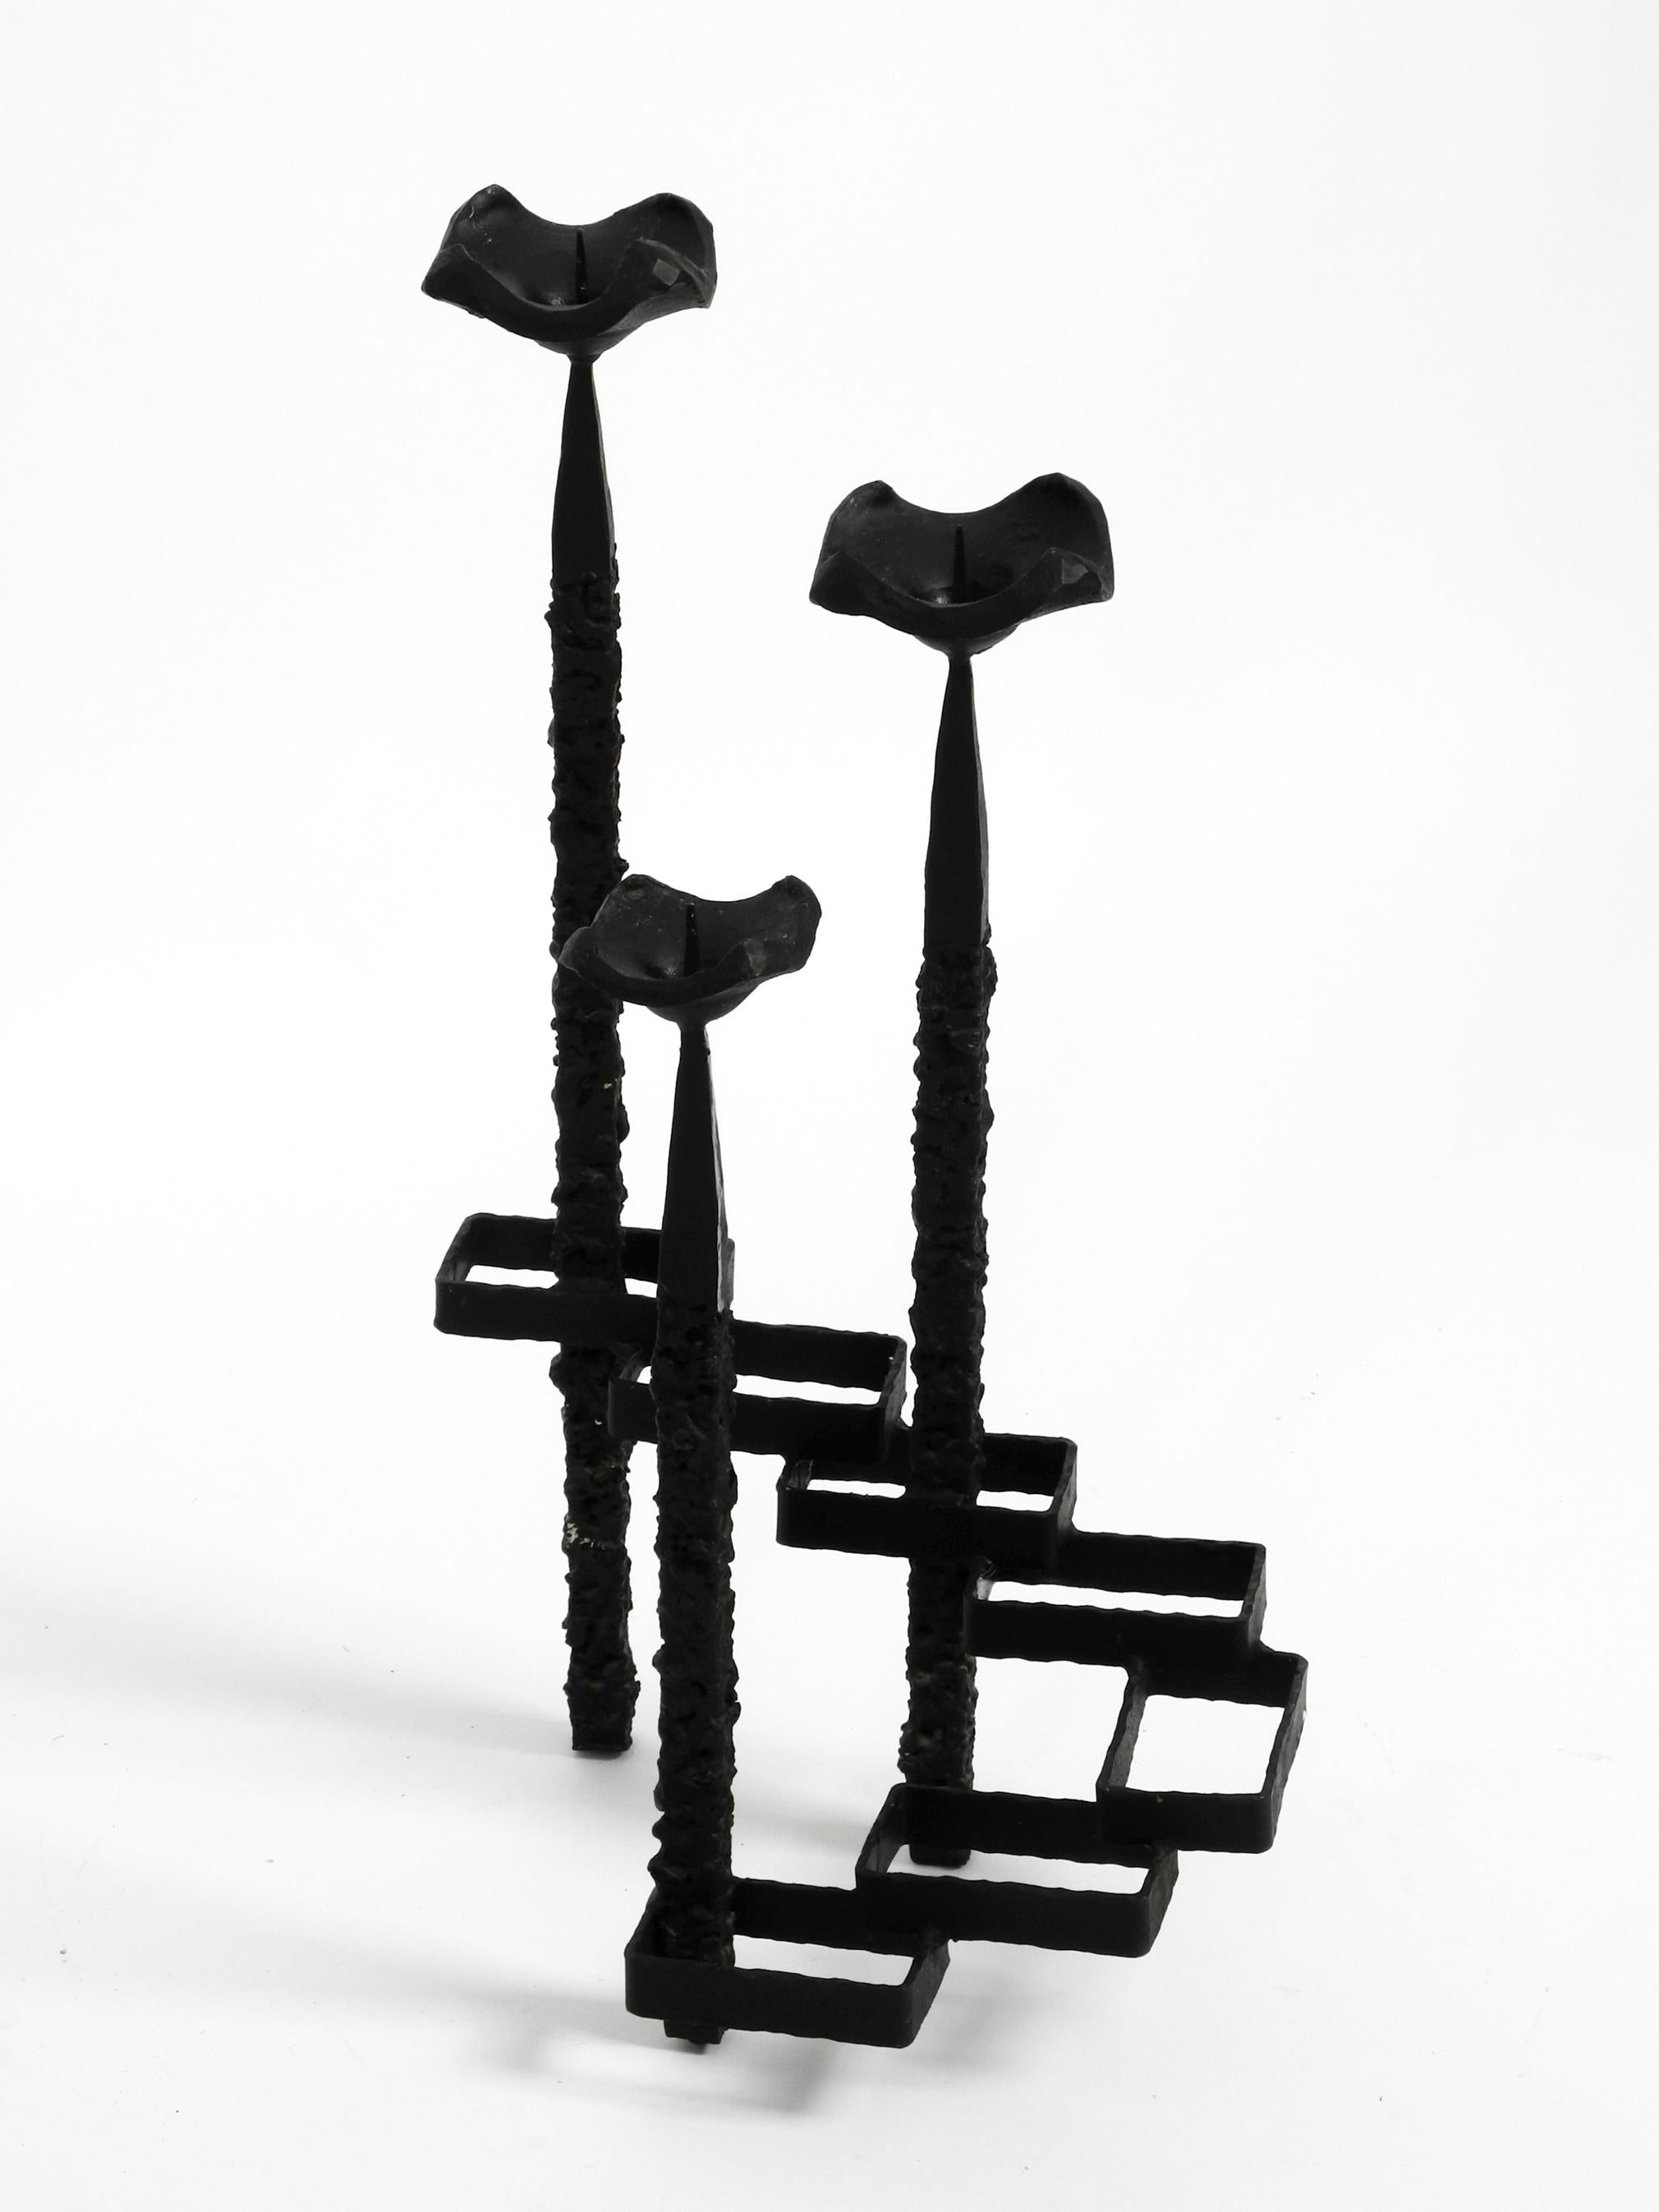 Mid-Century Modern Large Floor or Table Candle Holder Made of Wrought Iron in Brutalist Design  For Sale